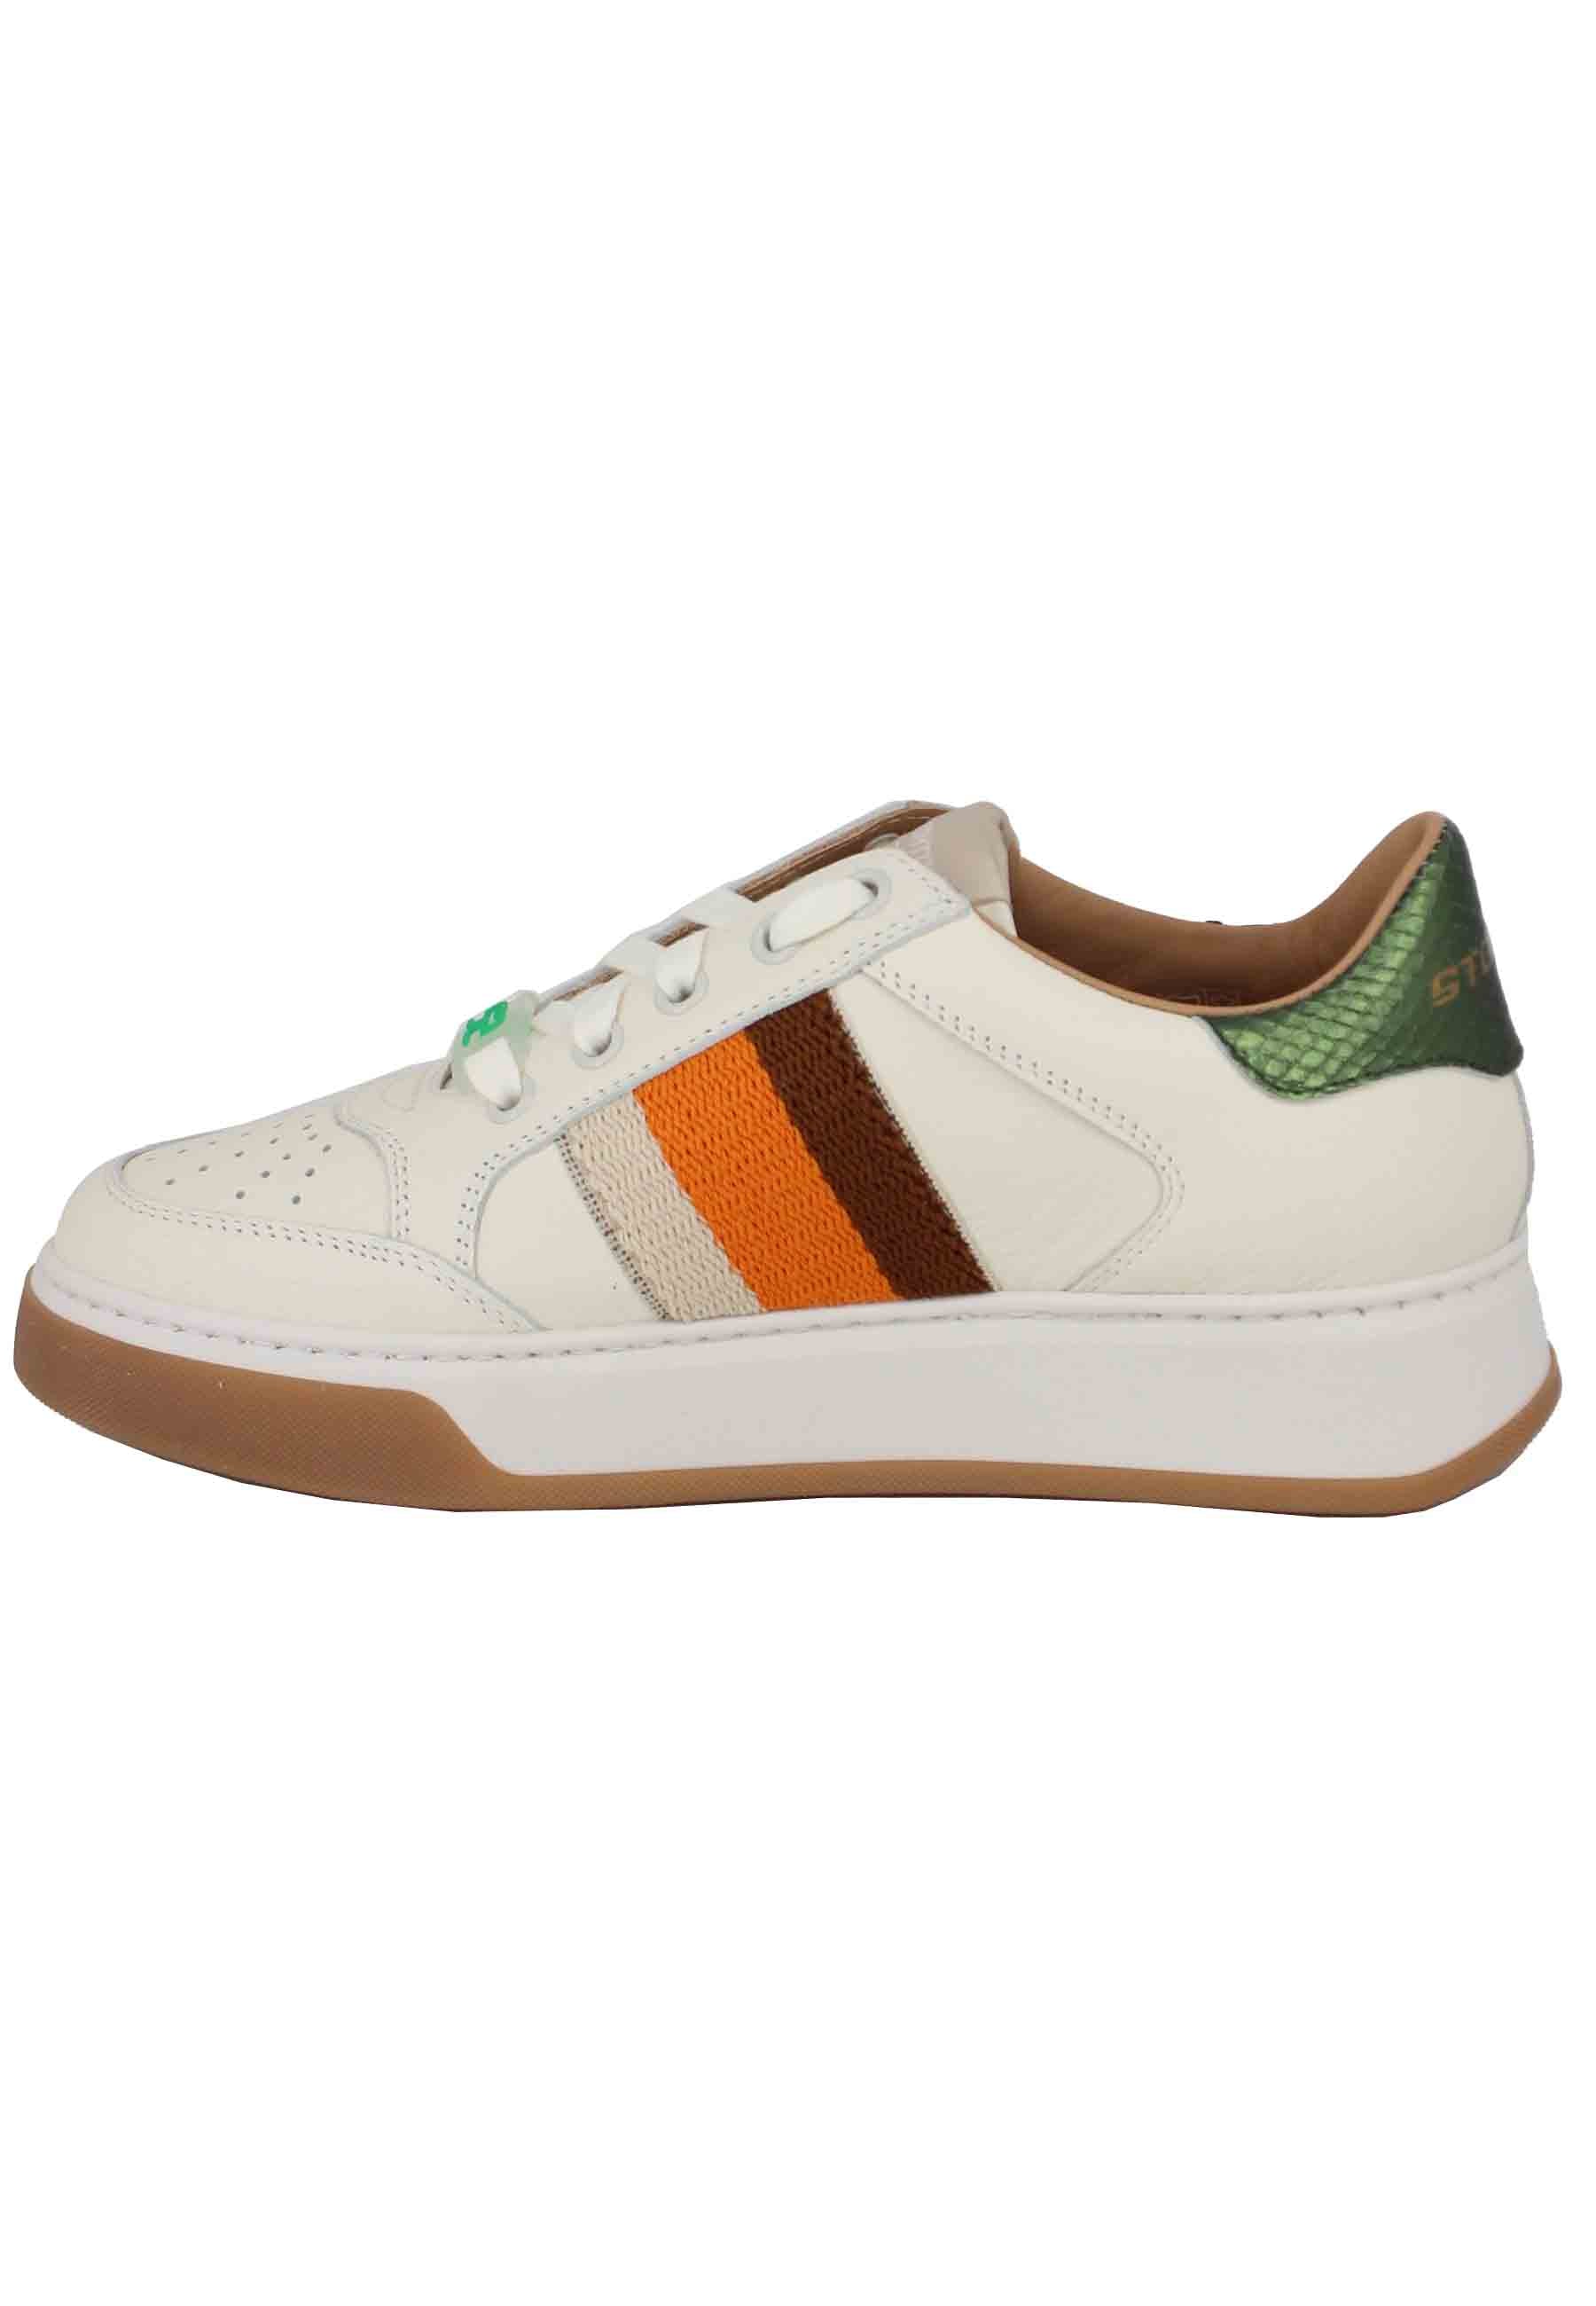 Sneakers donna in pelle off white